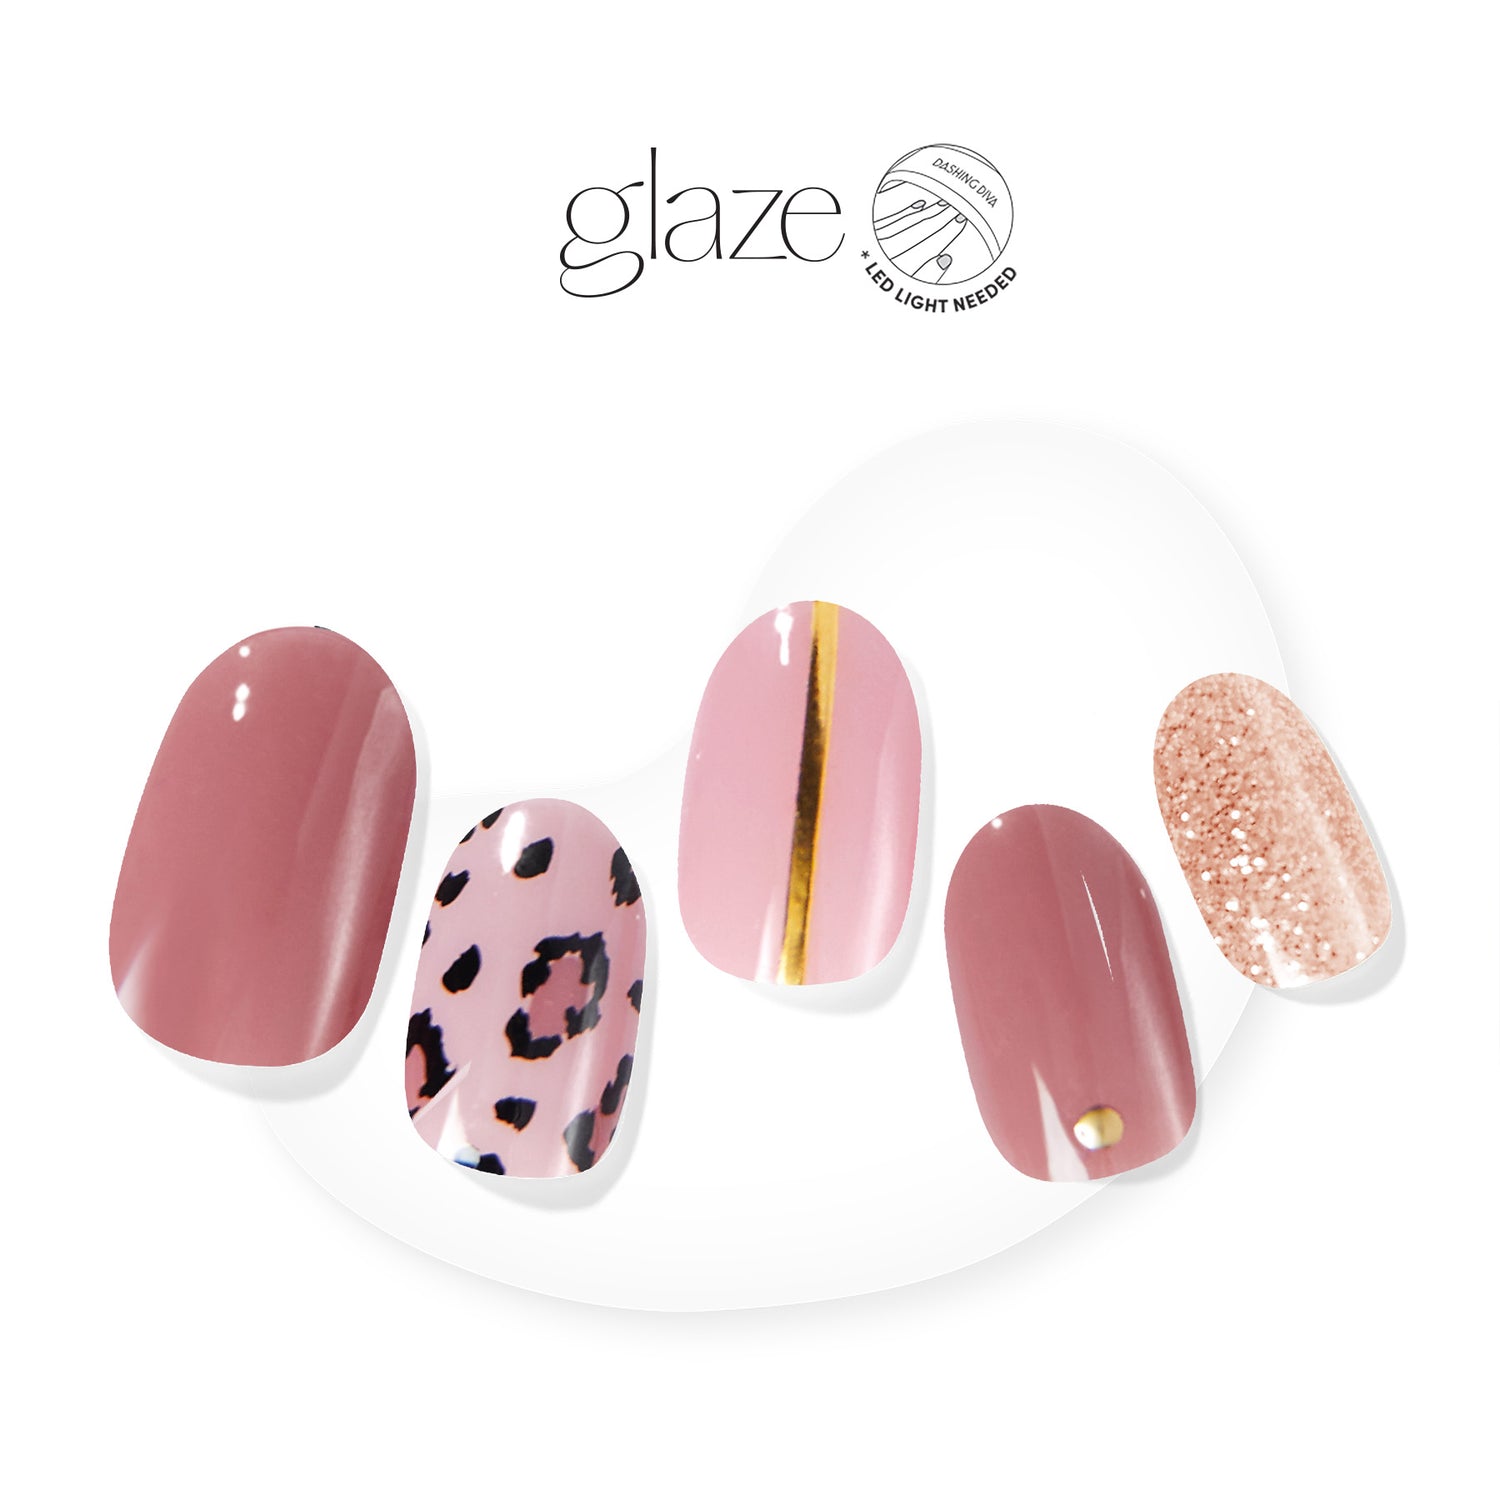 Dashing Diva GLAZE rose pink semi cured gel nail strips with cheetah print, gold metallic, and glitter accents.